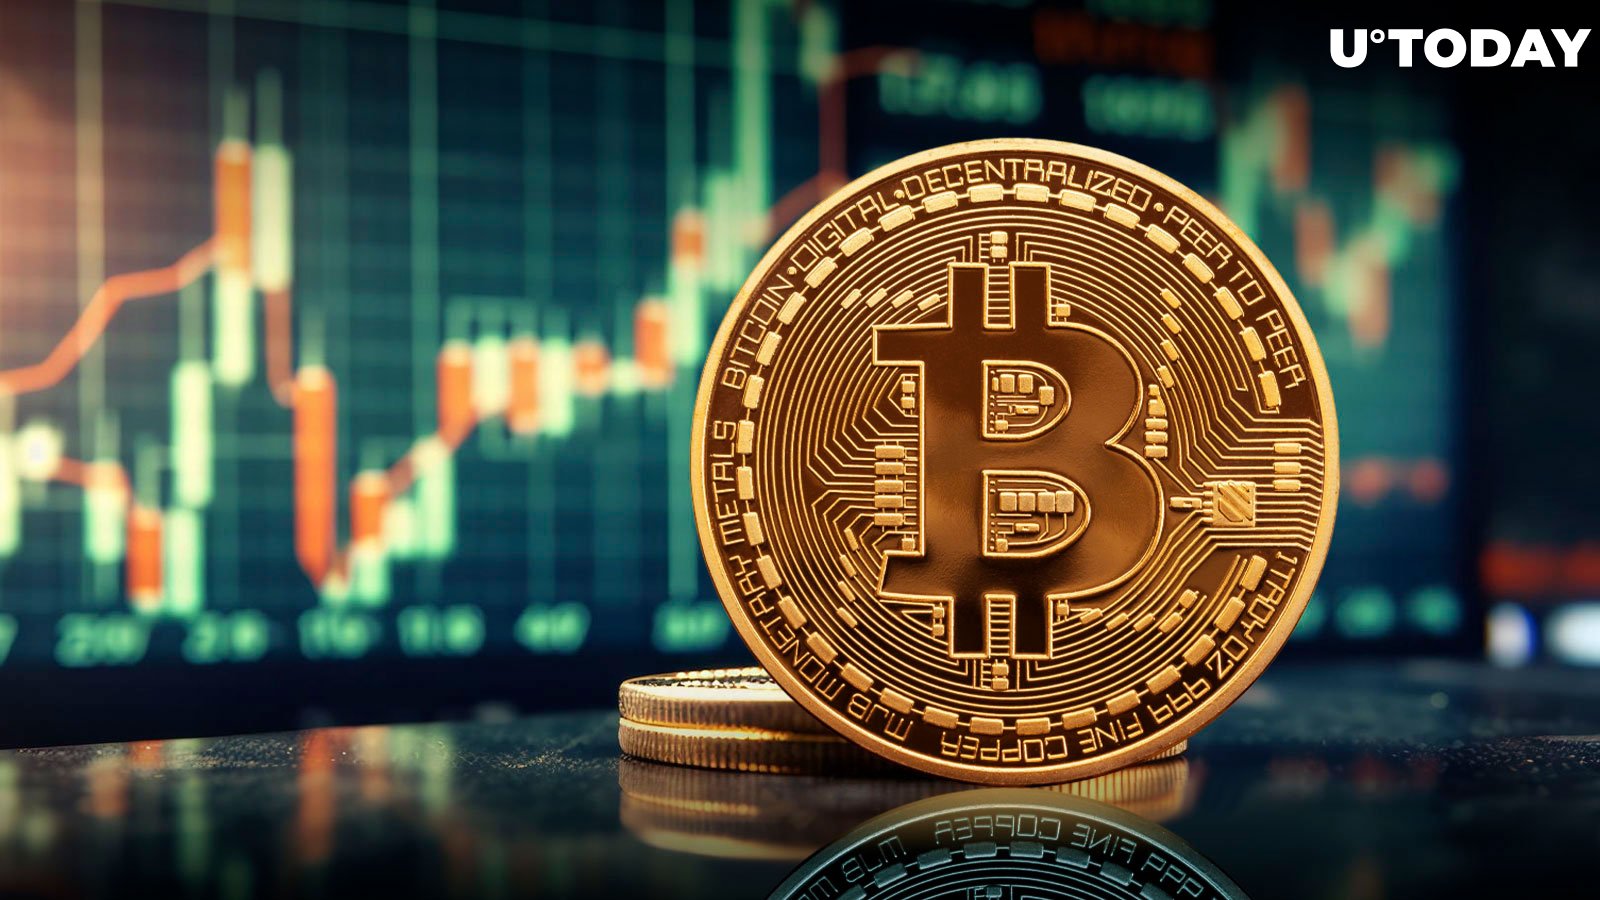 Bitcoin (BTC) Accumulation Trend Score Hits 3-Year High: Details